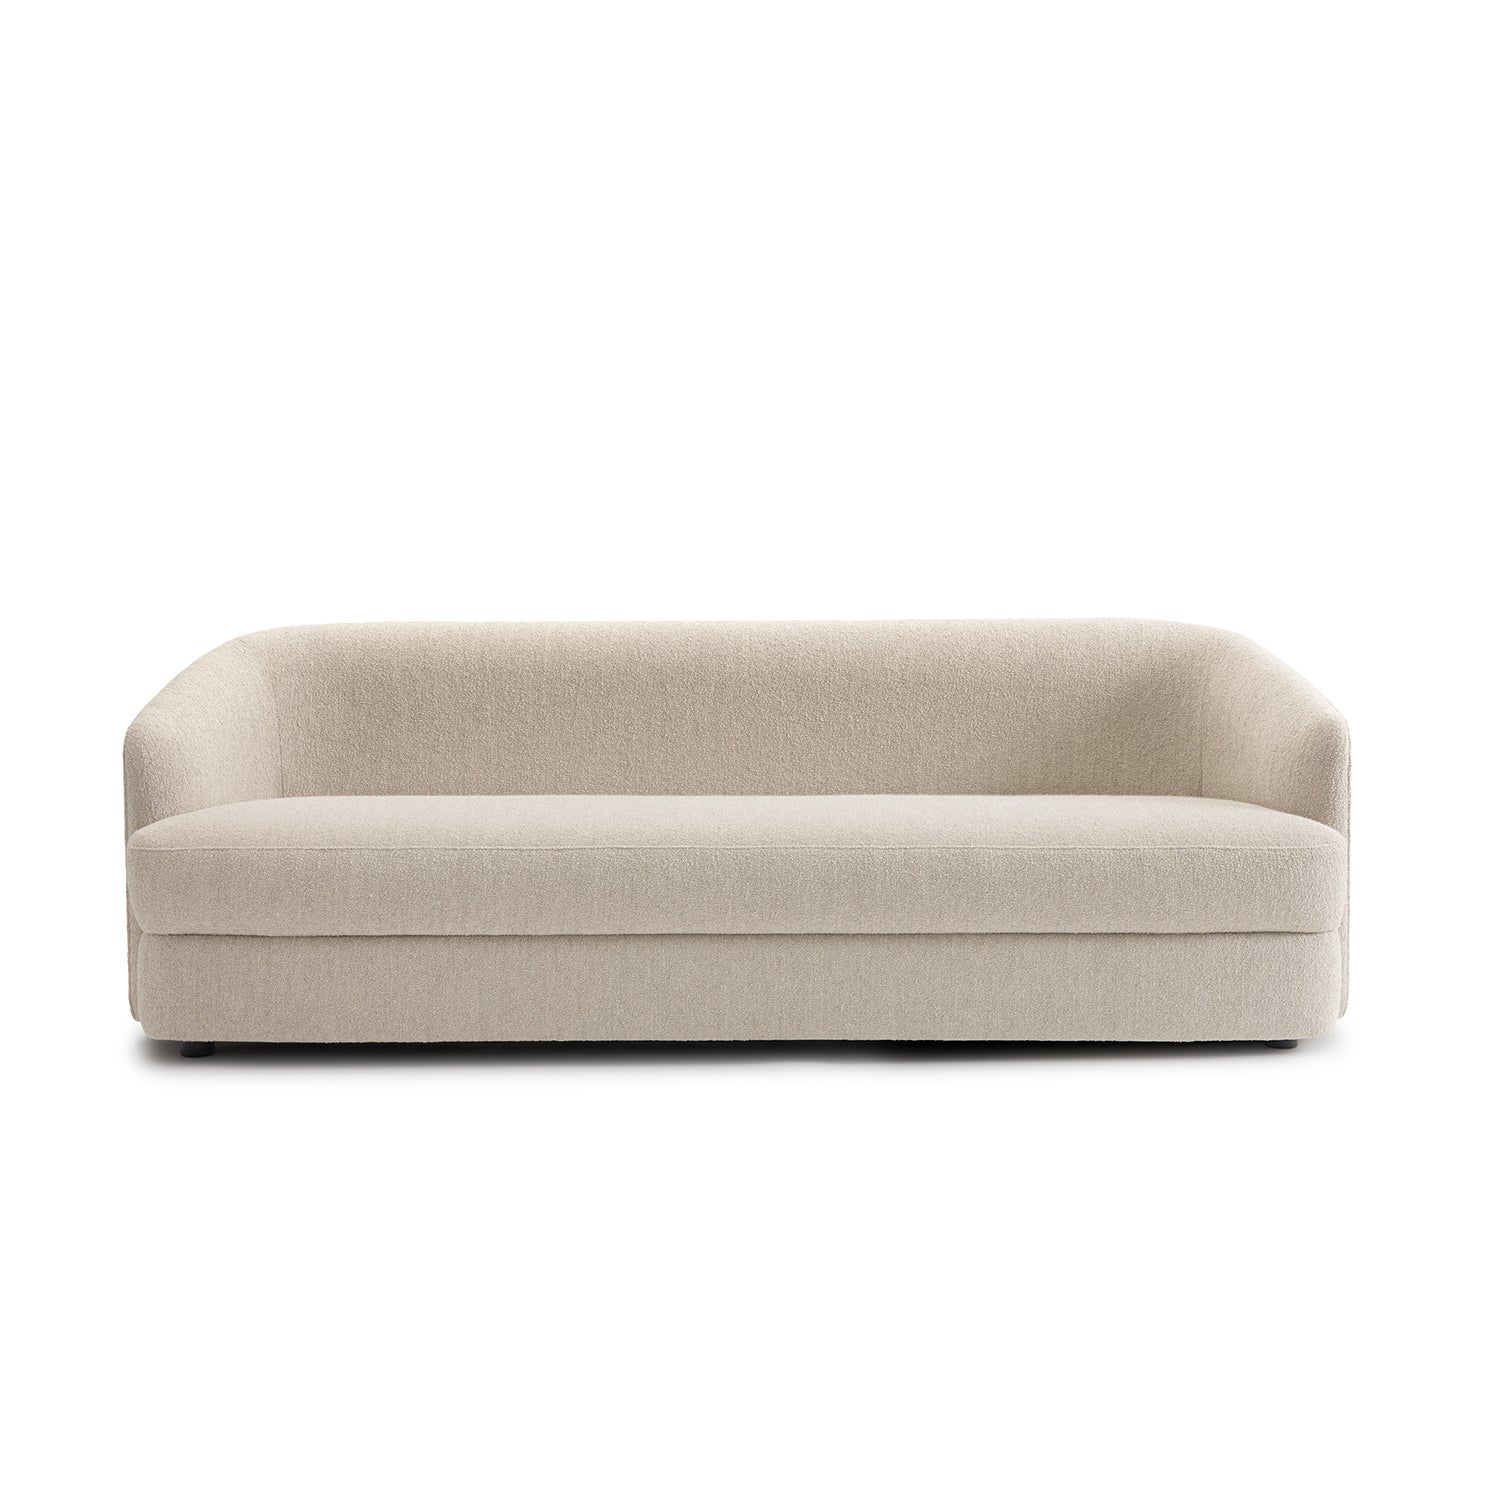 New Works Covewnt 3 Seater sofa in lana beige